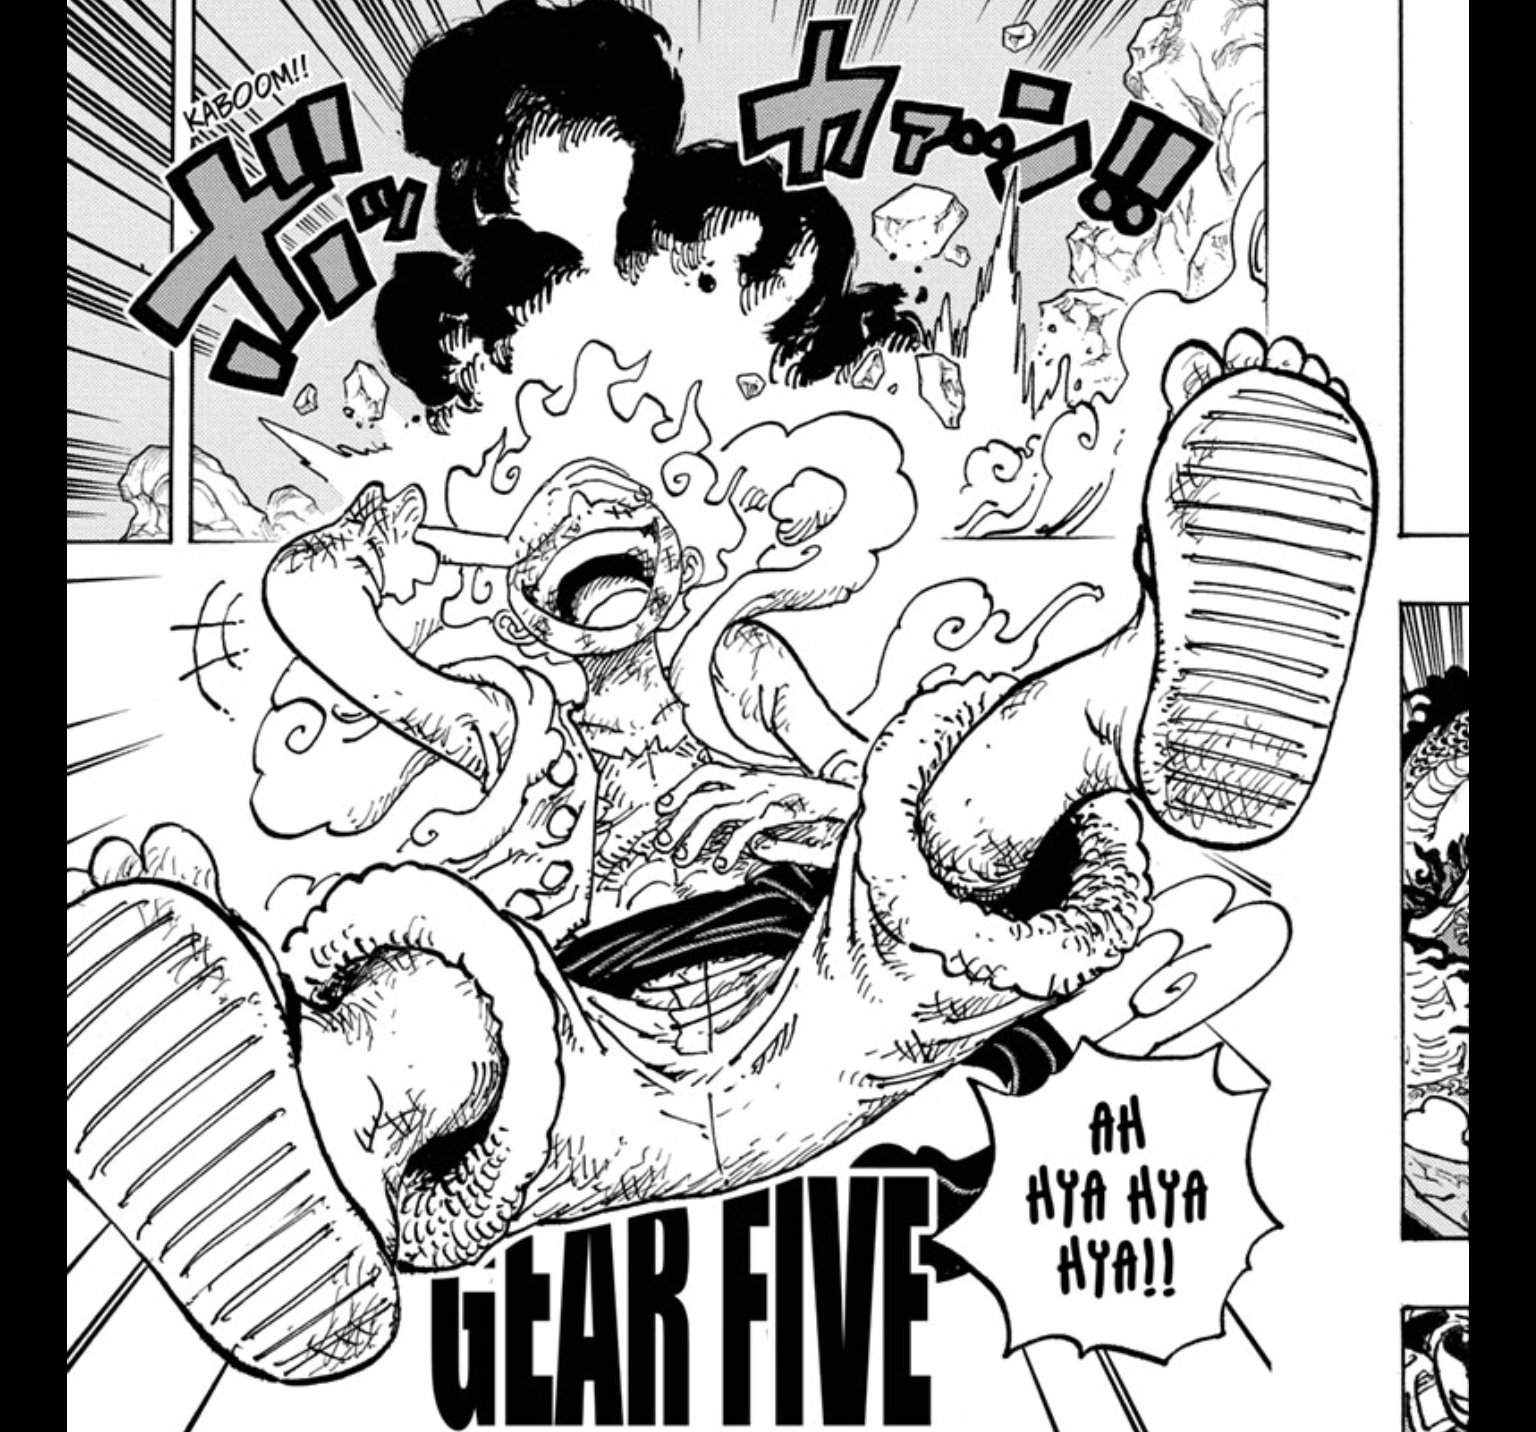 Luffy in his new Joyboy form, also known as his Gear Five power level, as seen in Chapter #1044. (Image: Eiichiro Oda/SHUEISHA Inc)